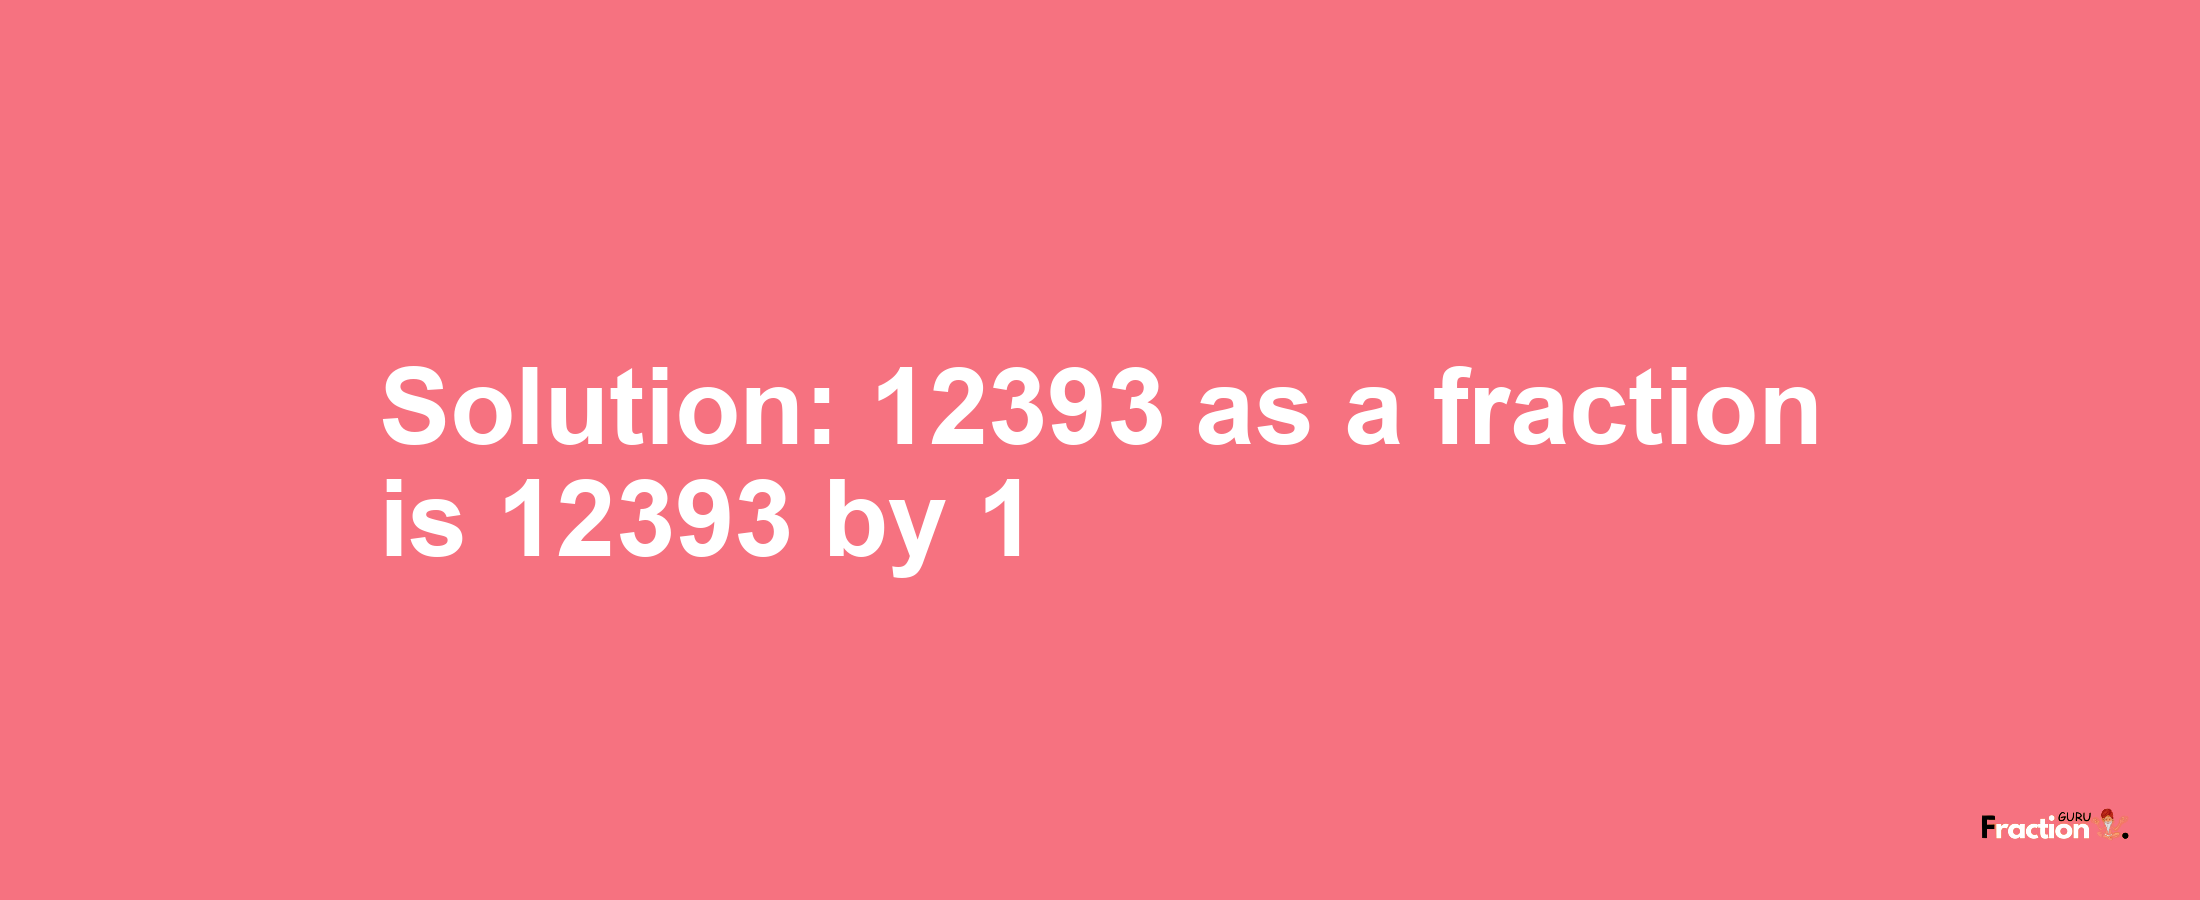 Solution:12393 as a fraction is 12393/1